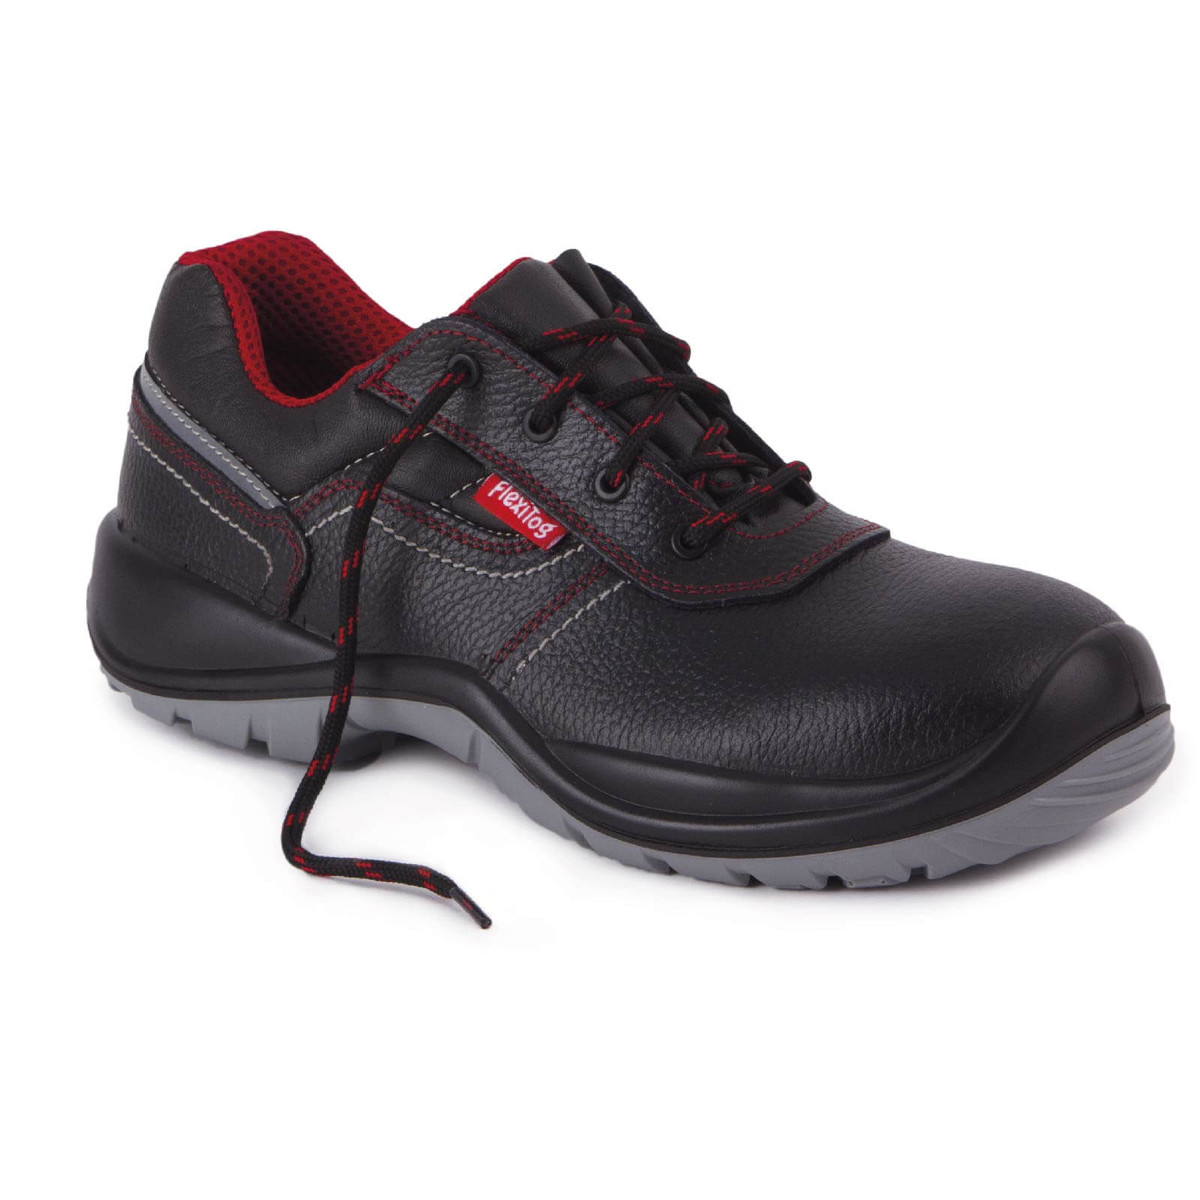 Flexitog 301 thermal leather safety shoe